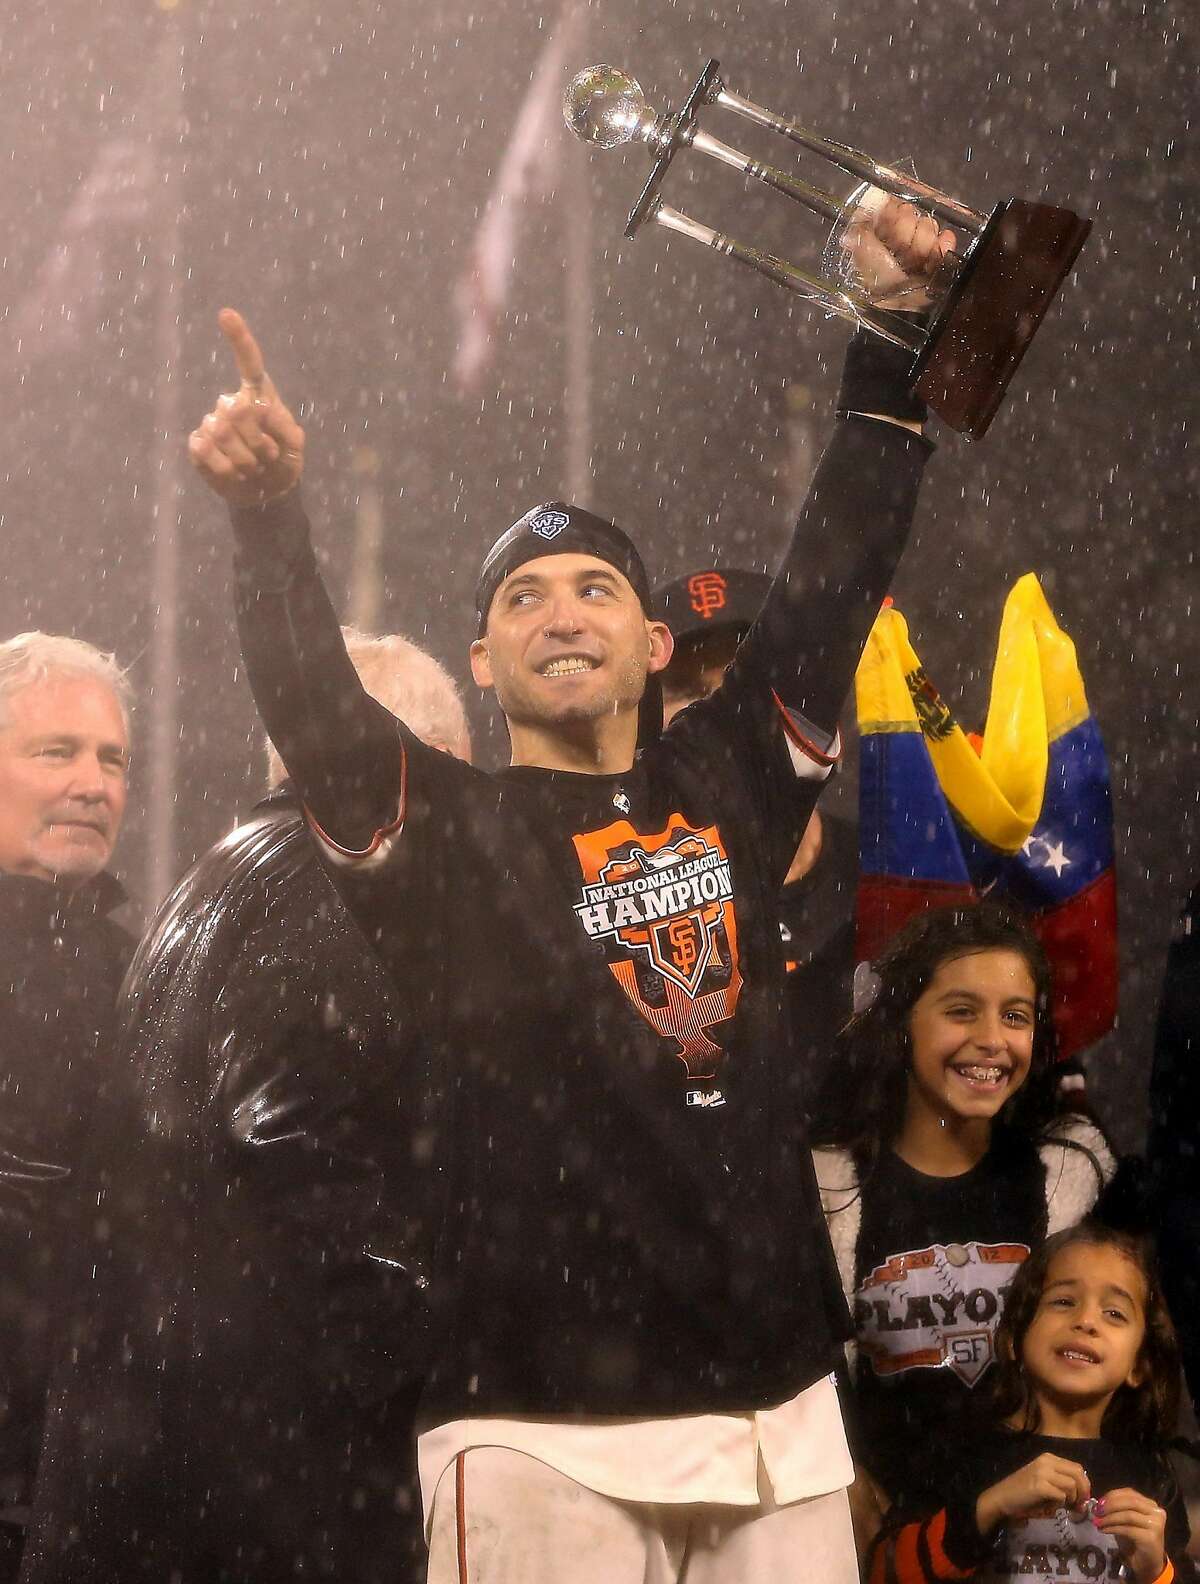 SAN FRANCISCO, CA - OCTOBER 22: Marco Scutaro #19 of the San Francisco Giants holds up the MVP trophy after the Giants defeat the St. Louis Cardinals 9-0 in Game Seven of the National League Championship Series at AT&T Park on October 22, 2012 in San Francisco, California. (Photo by Christian Petersen/Getty Images)